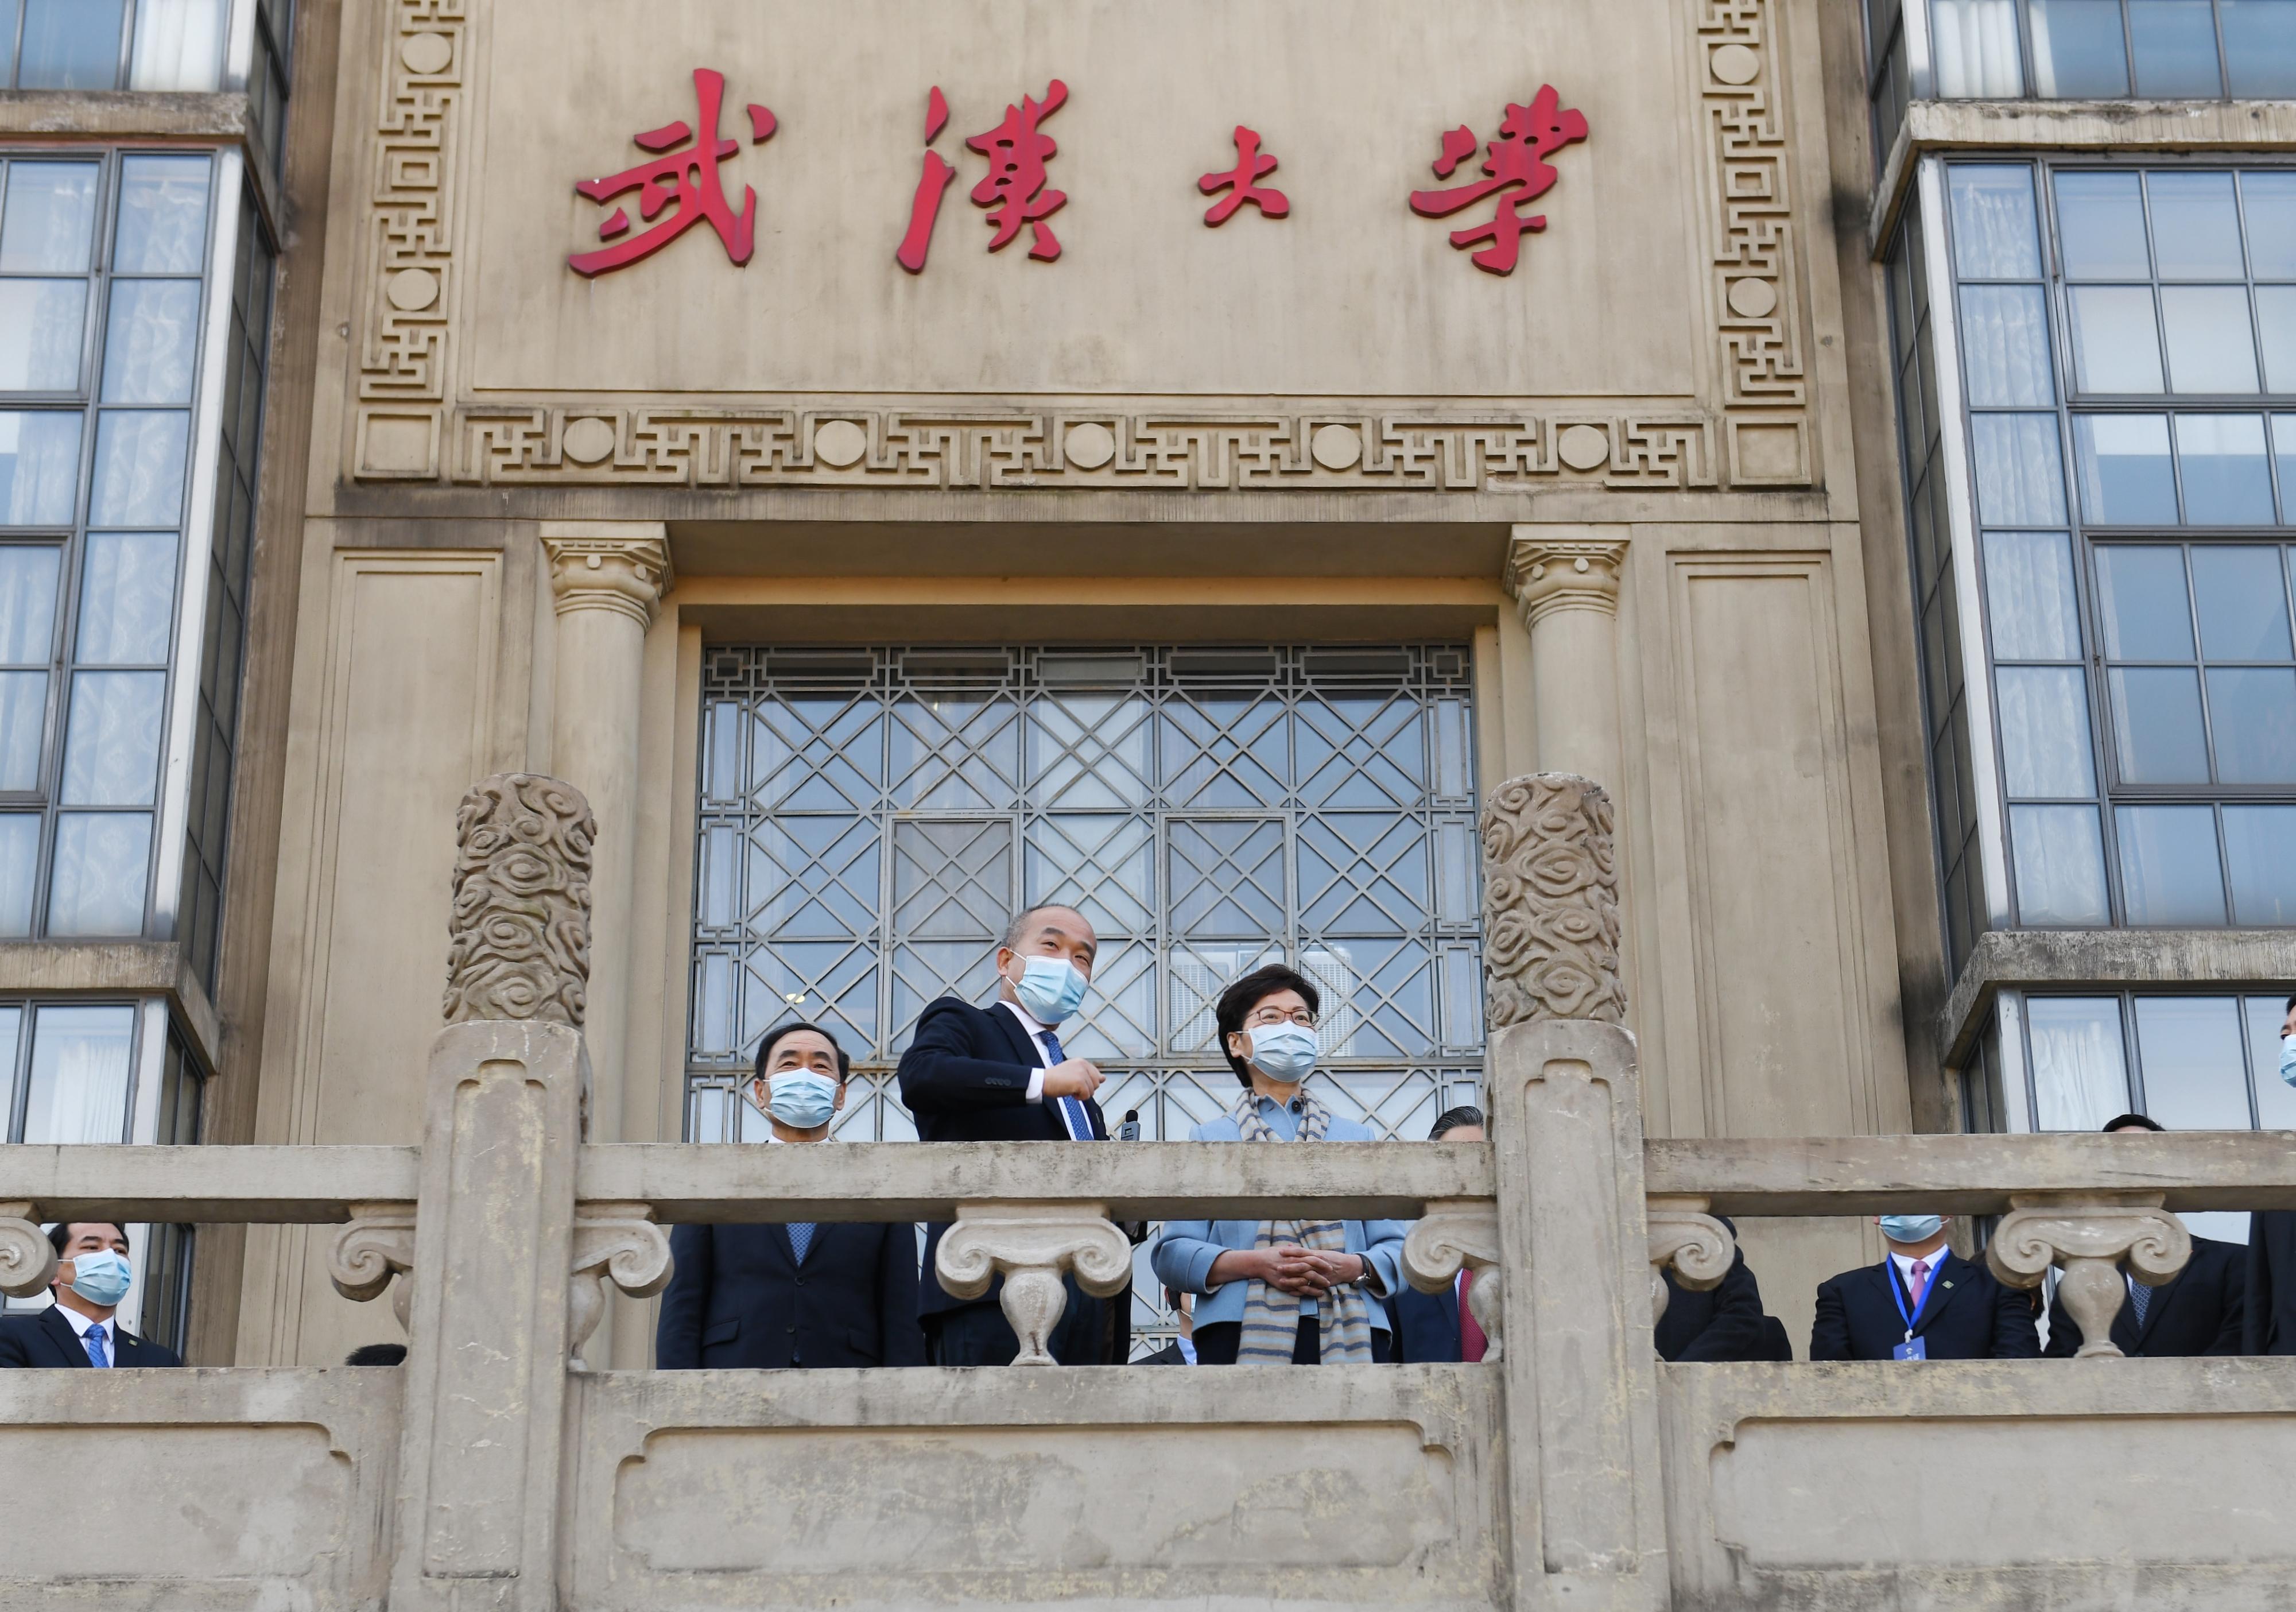 The Chief Executive, Mrs Carrie Lam, visited Wuhan University in Wuhan today (December 1). Photo shows Mrs Lam (right), accompanied by Vice Governor of Hubei Province Mr Zhao Haishan (left) and the President of Wuhan University, Professor Dou Xiankang (centre), touring the campus.